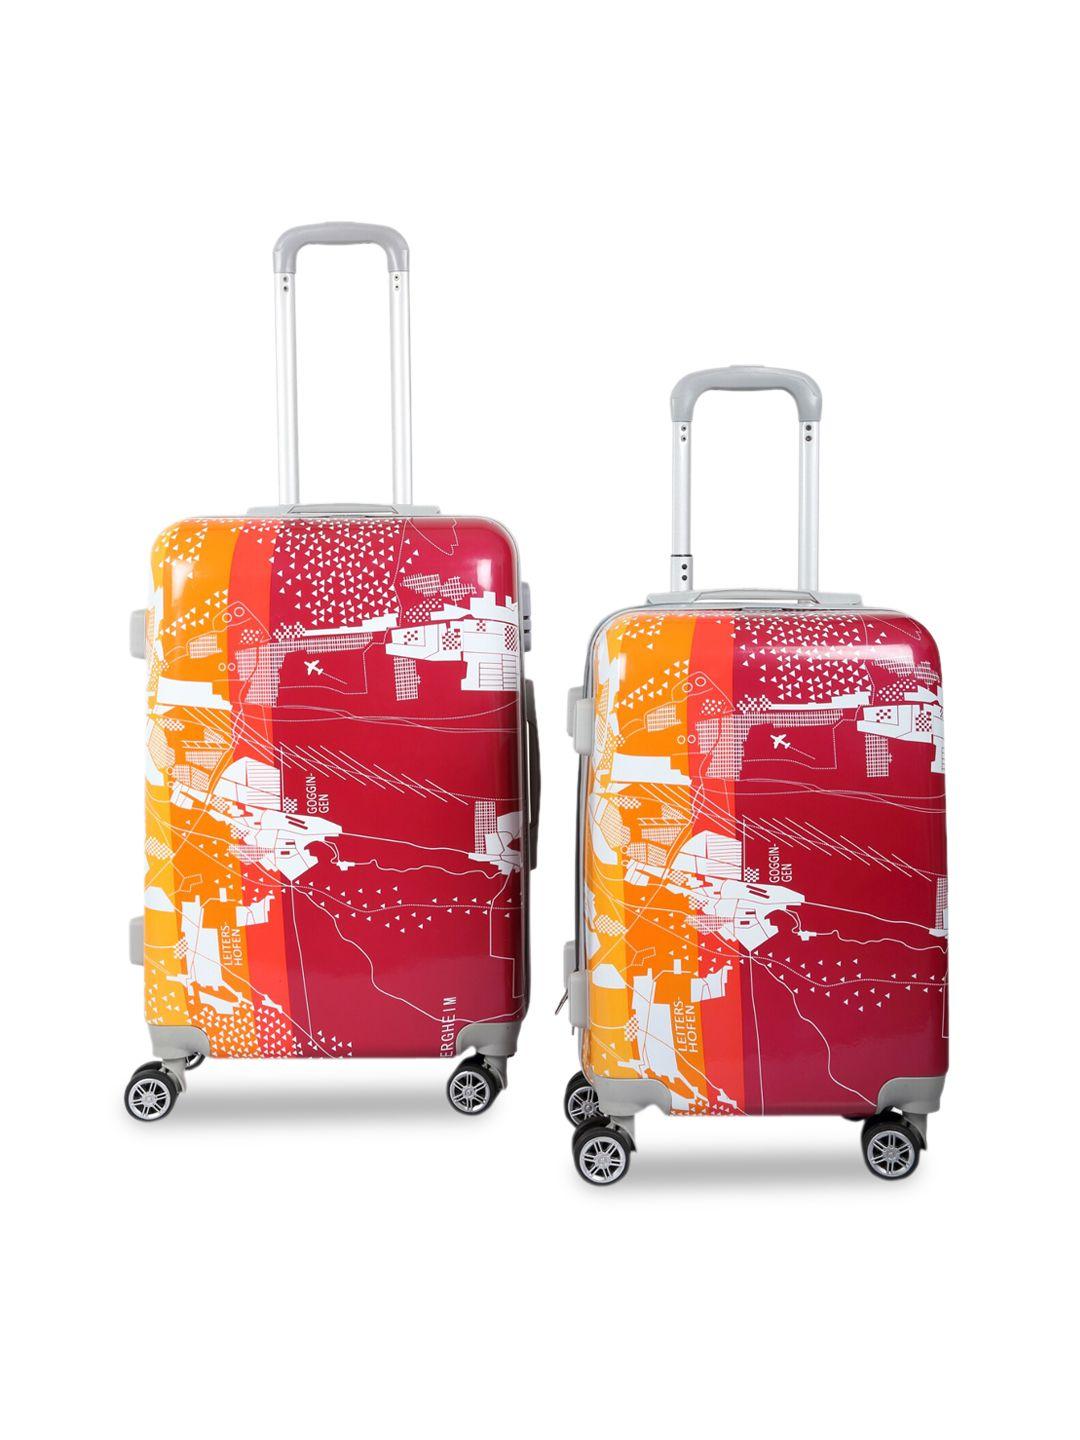 polo class unisex set of 2 red & orange printed trolley bag in medium & small size